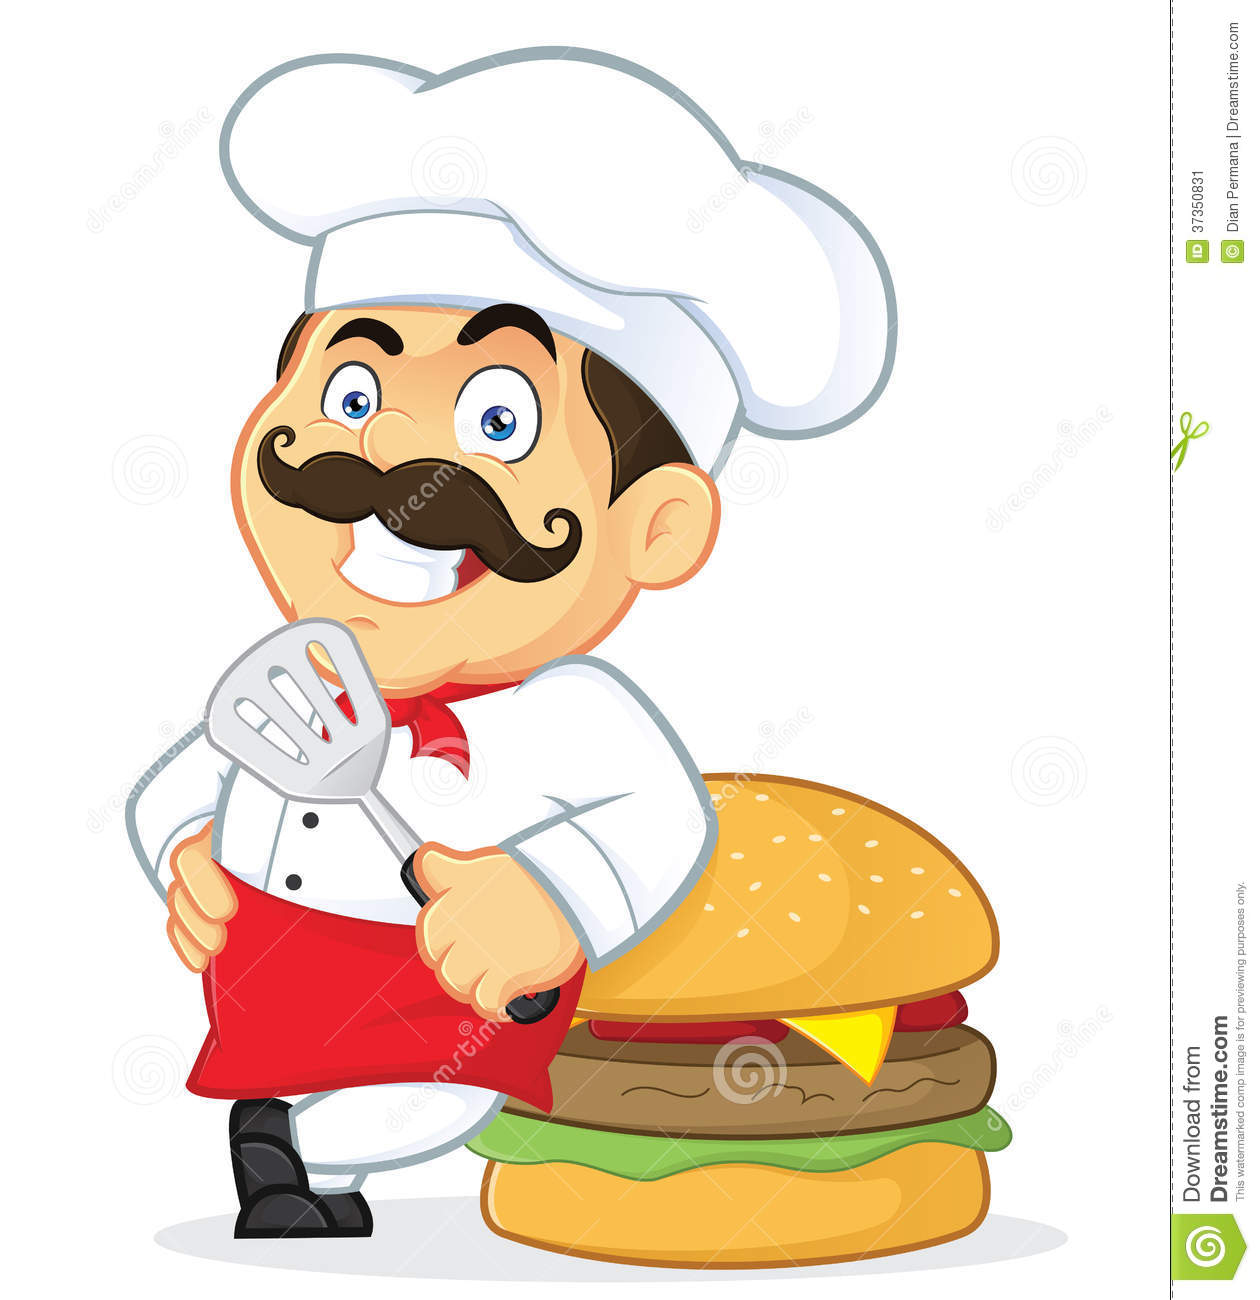 Chef with Giant Burger Stock Image